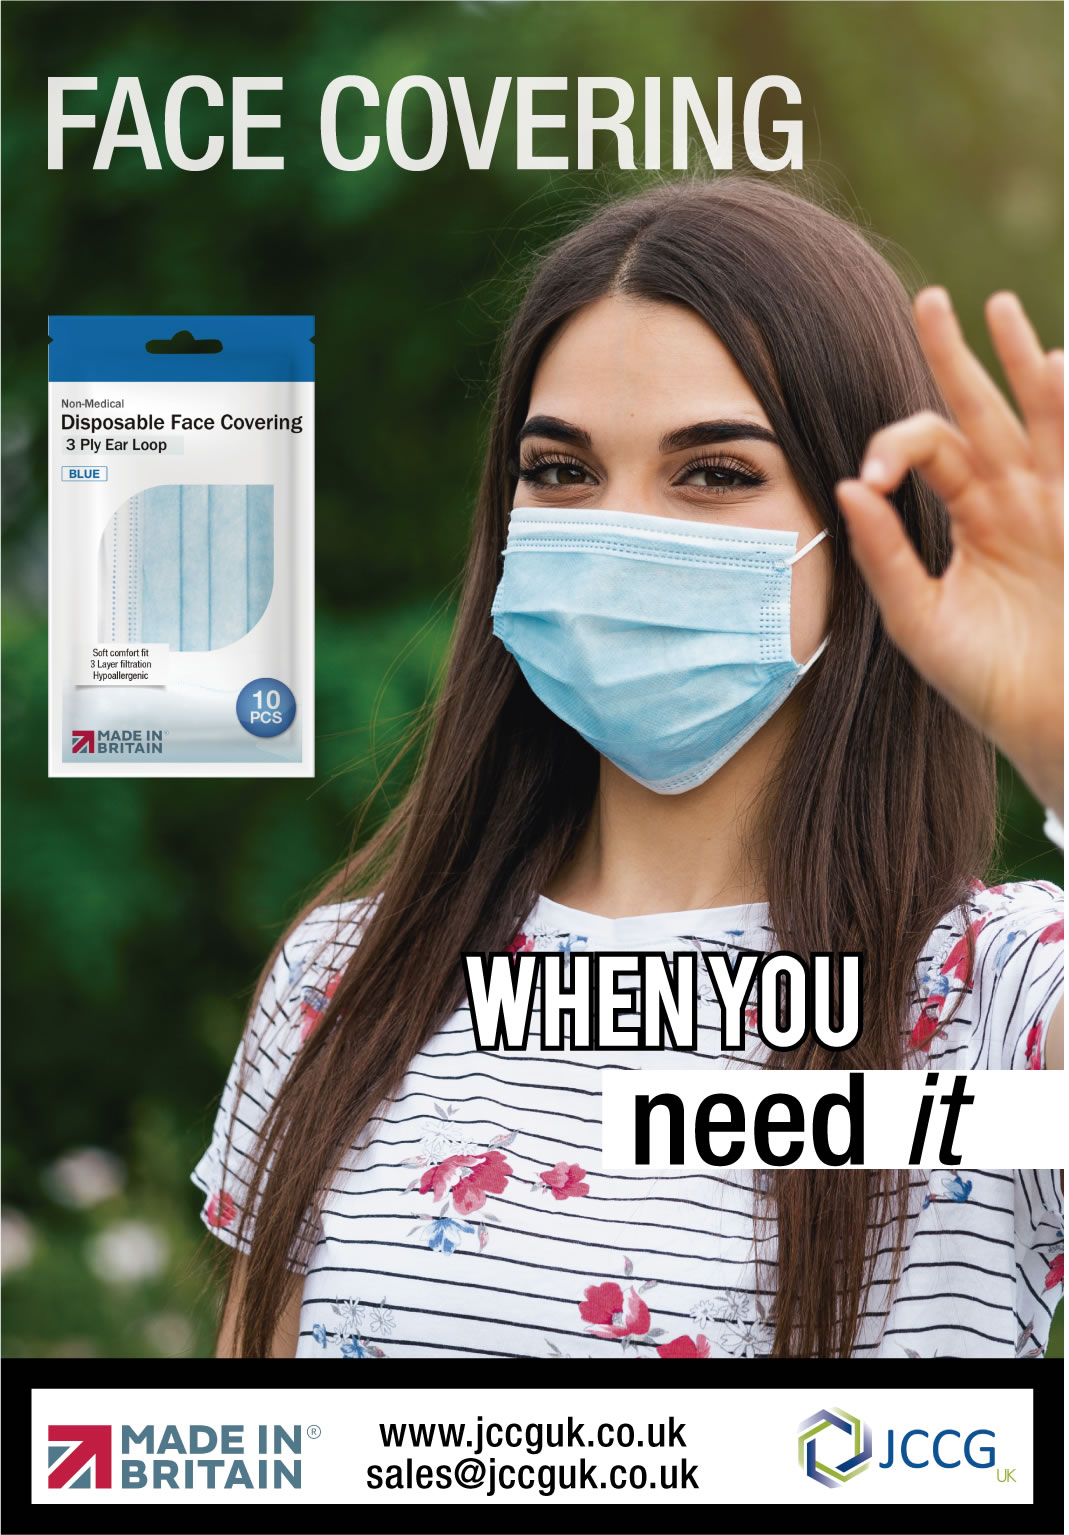 Disposable Face Coverings